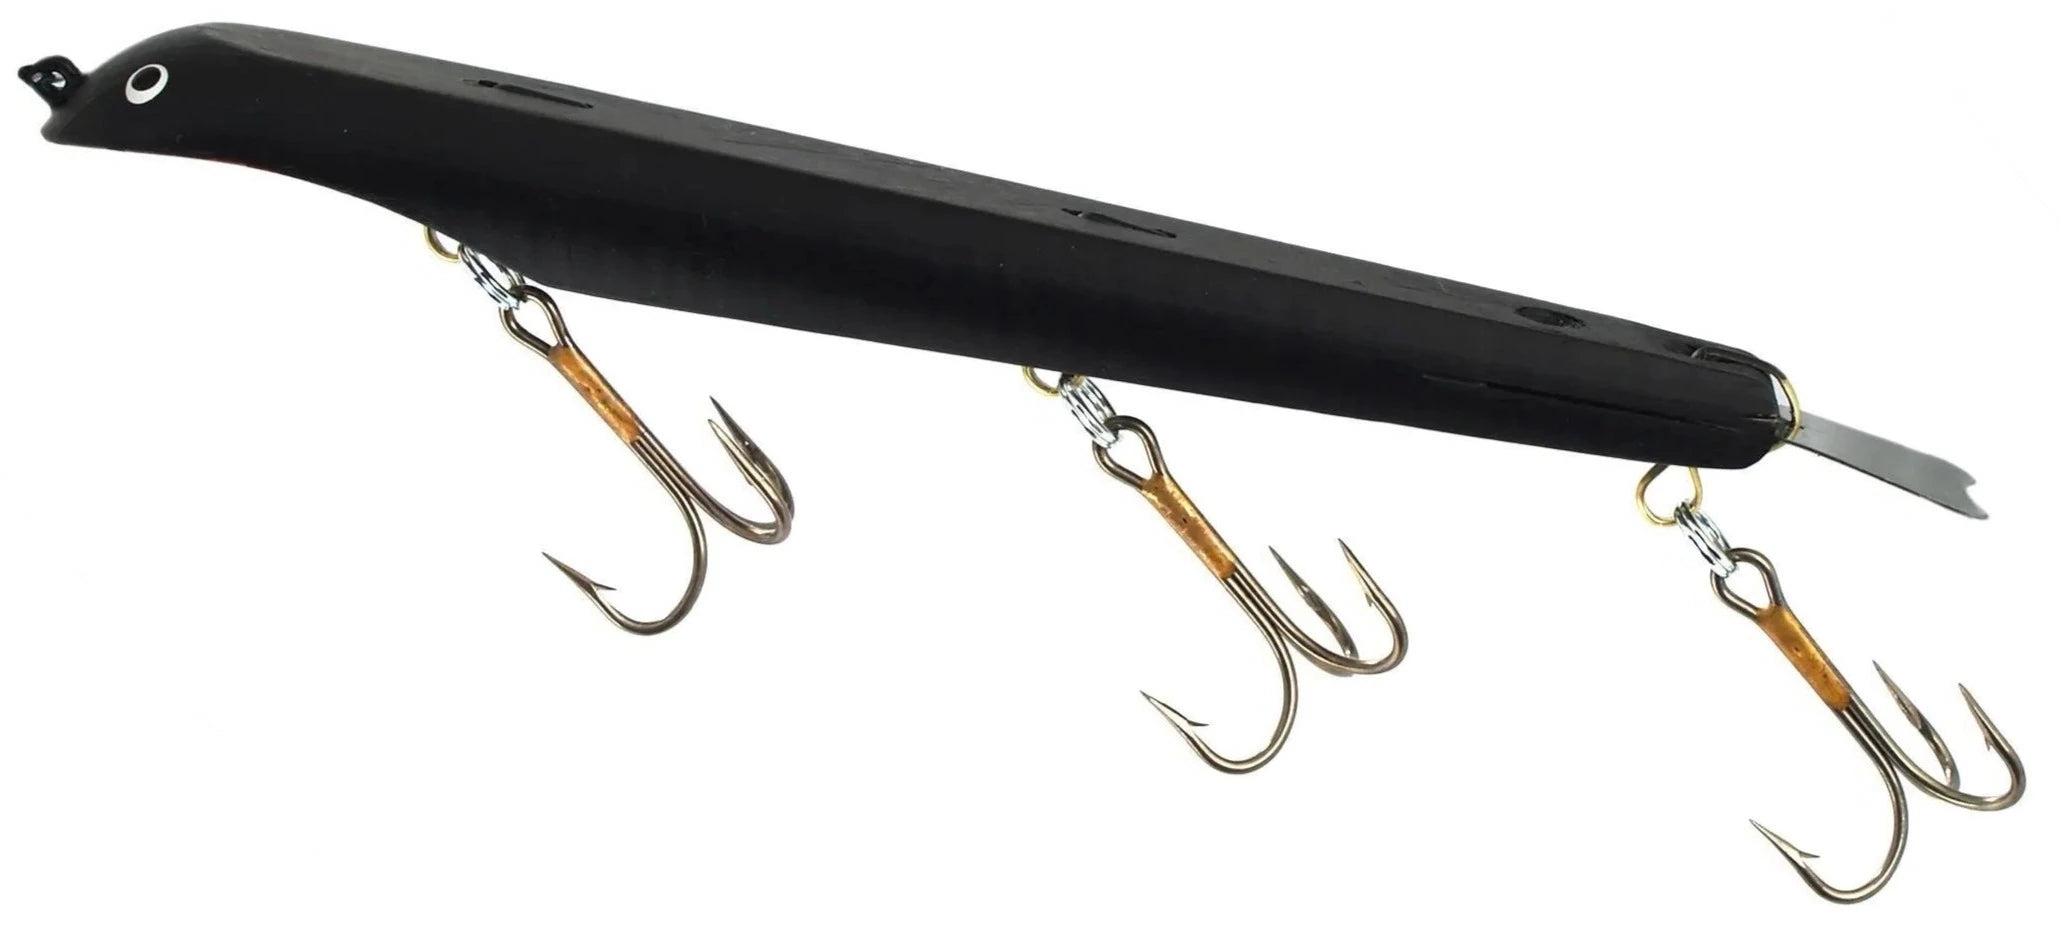 Suick 7 Red Hot Musky Lure Walleye